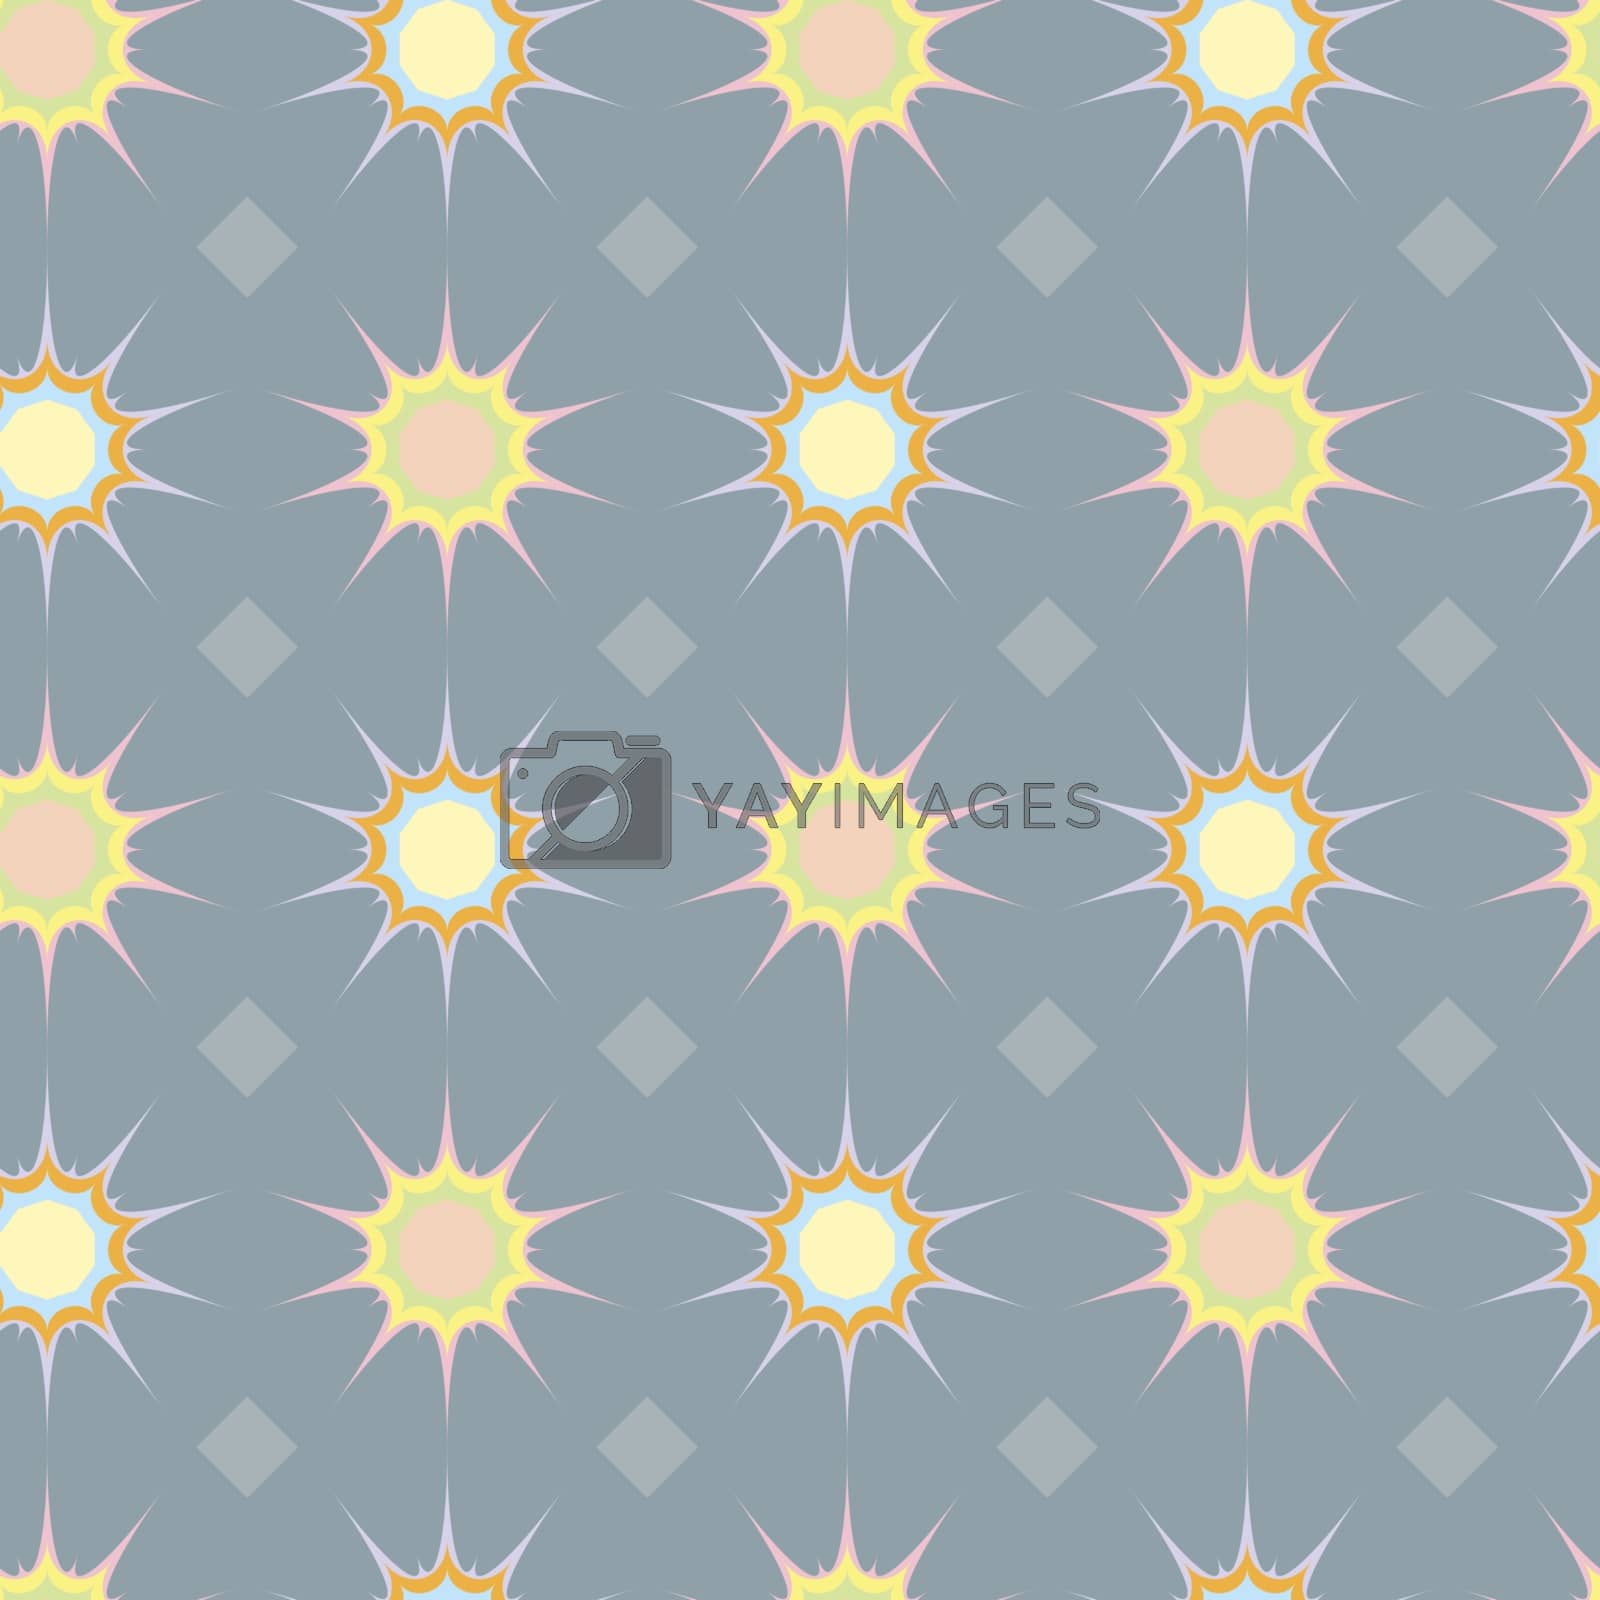 Royalty free image of Abstract ethnic geometric seamless pattern with stars by Musjaka